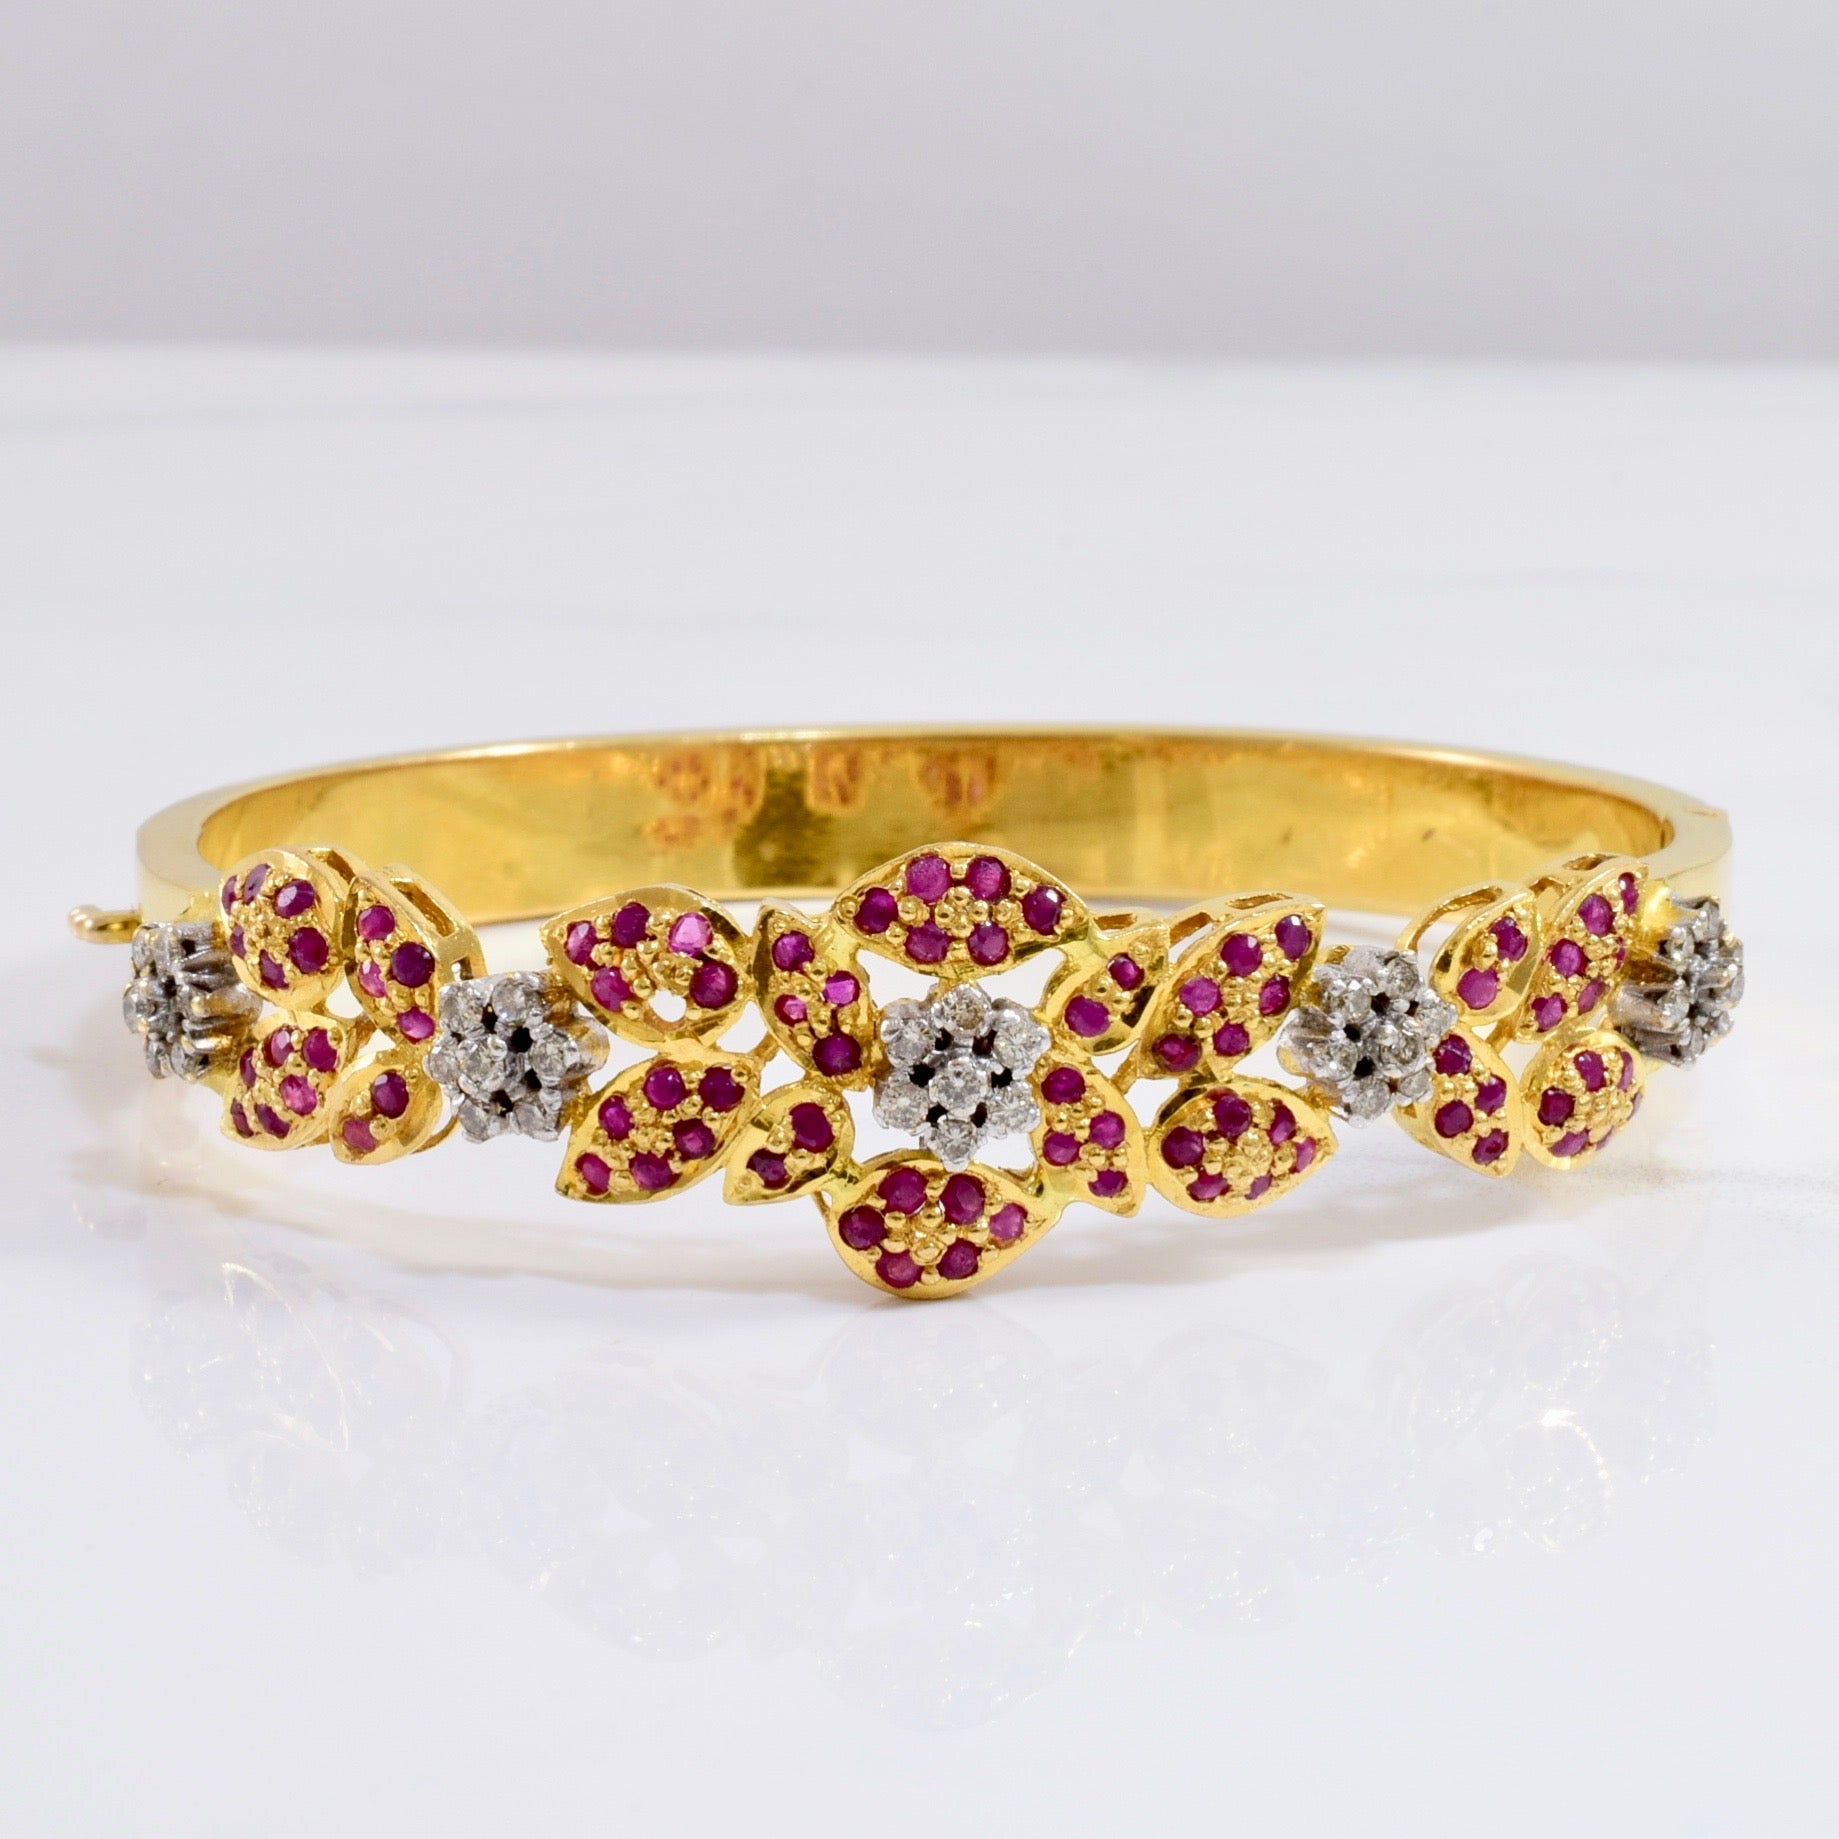 Floral Diamond and Ruby Cluster Bangle | 0.42 ctw SZ 7.5